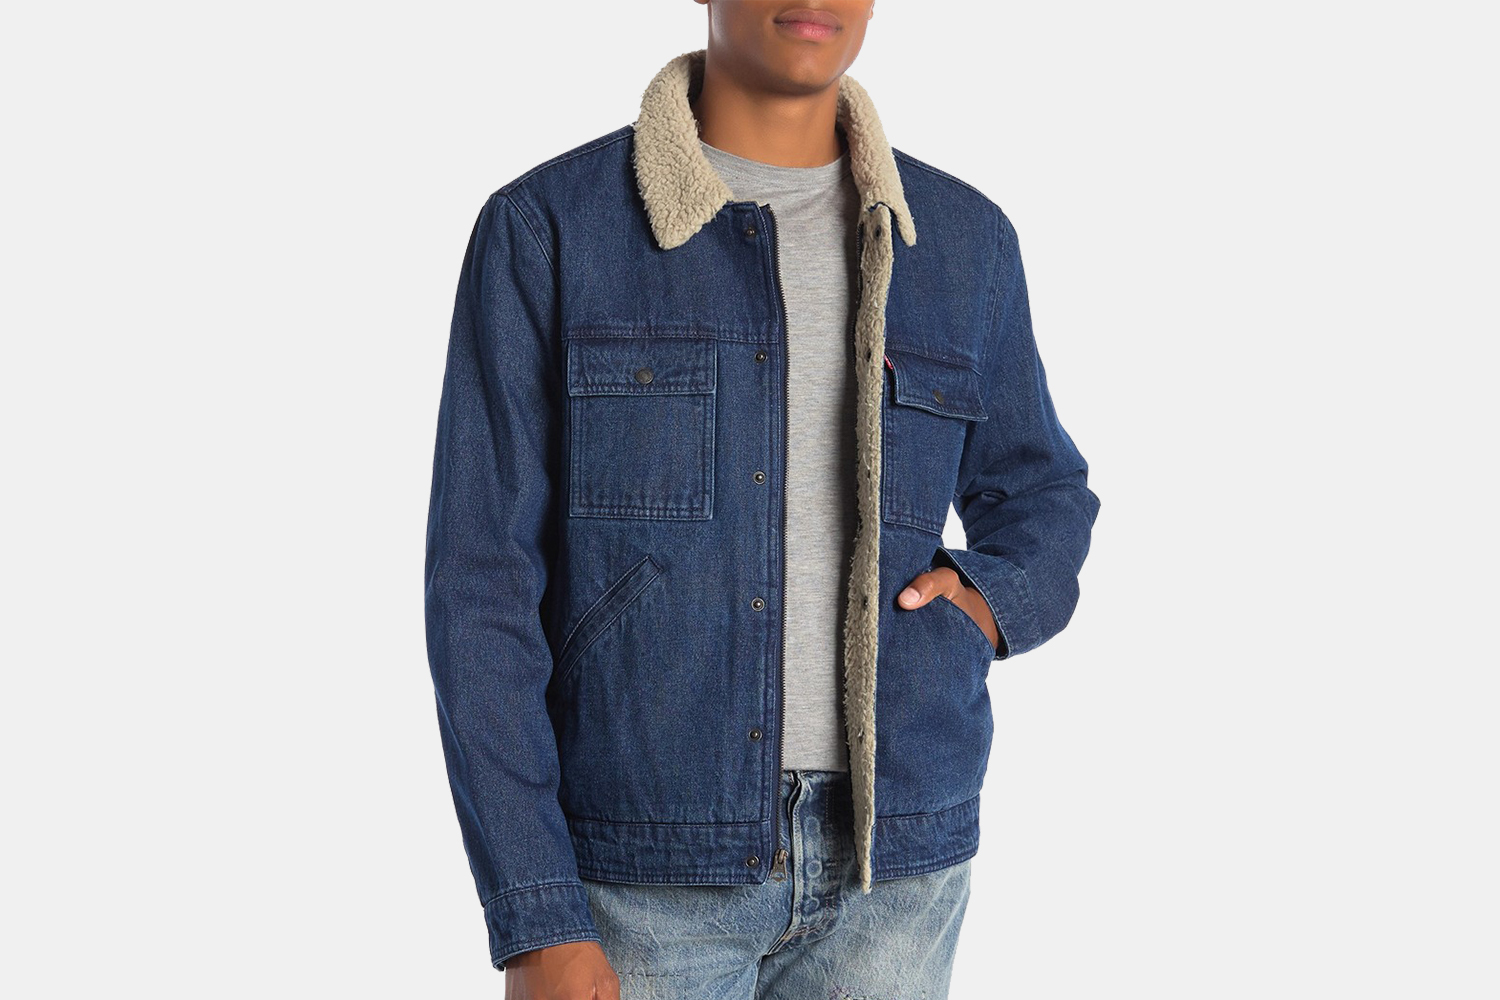 levis denim jacket with sheep's wool lining